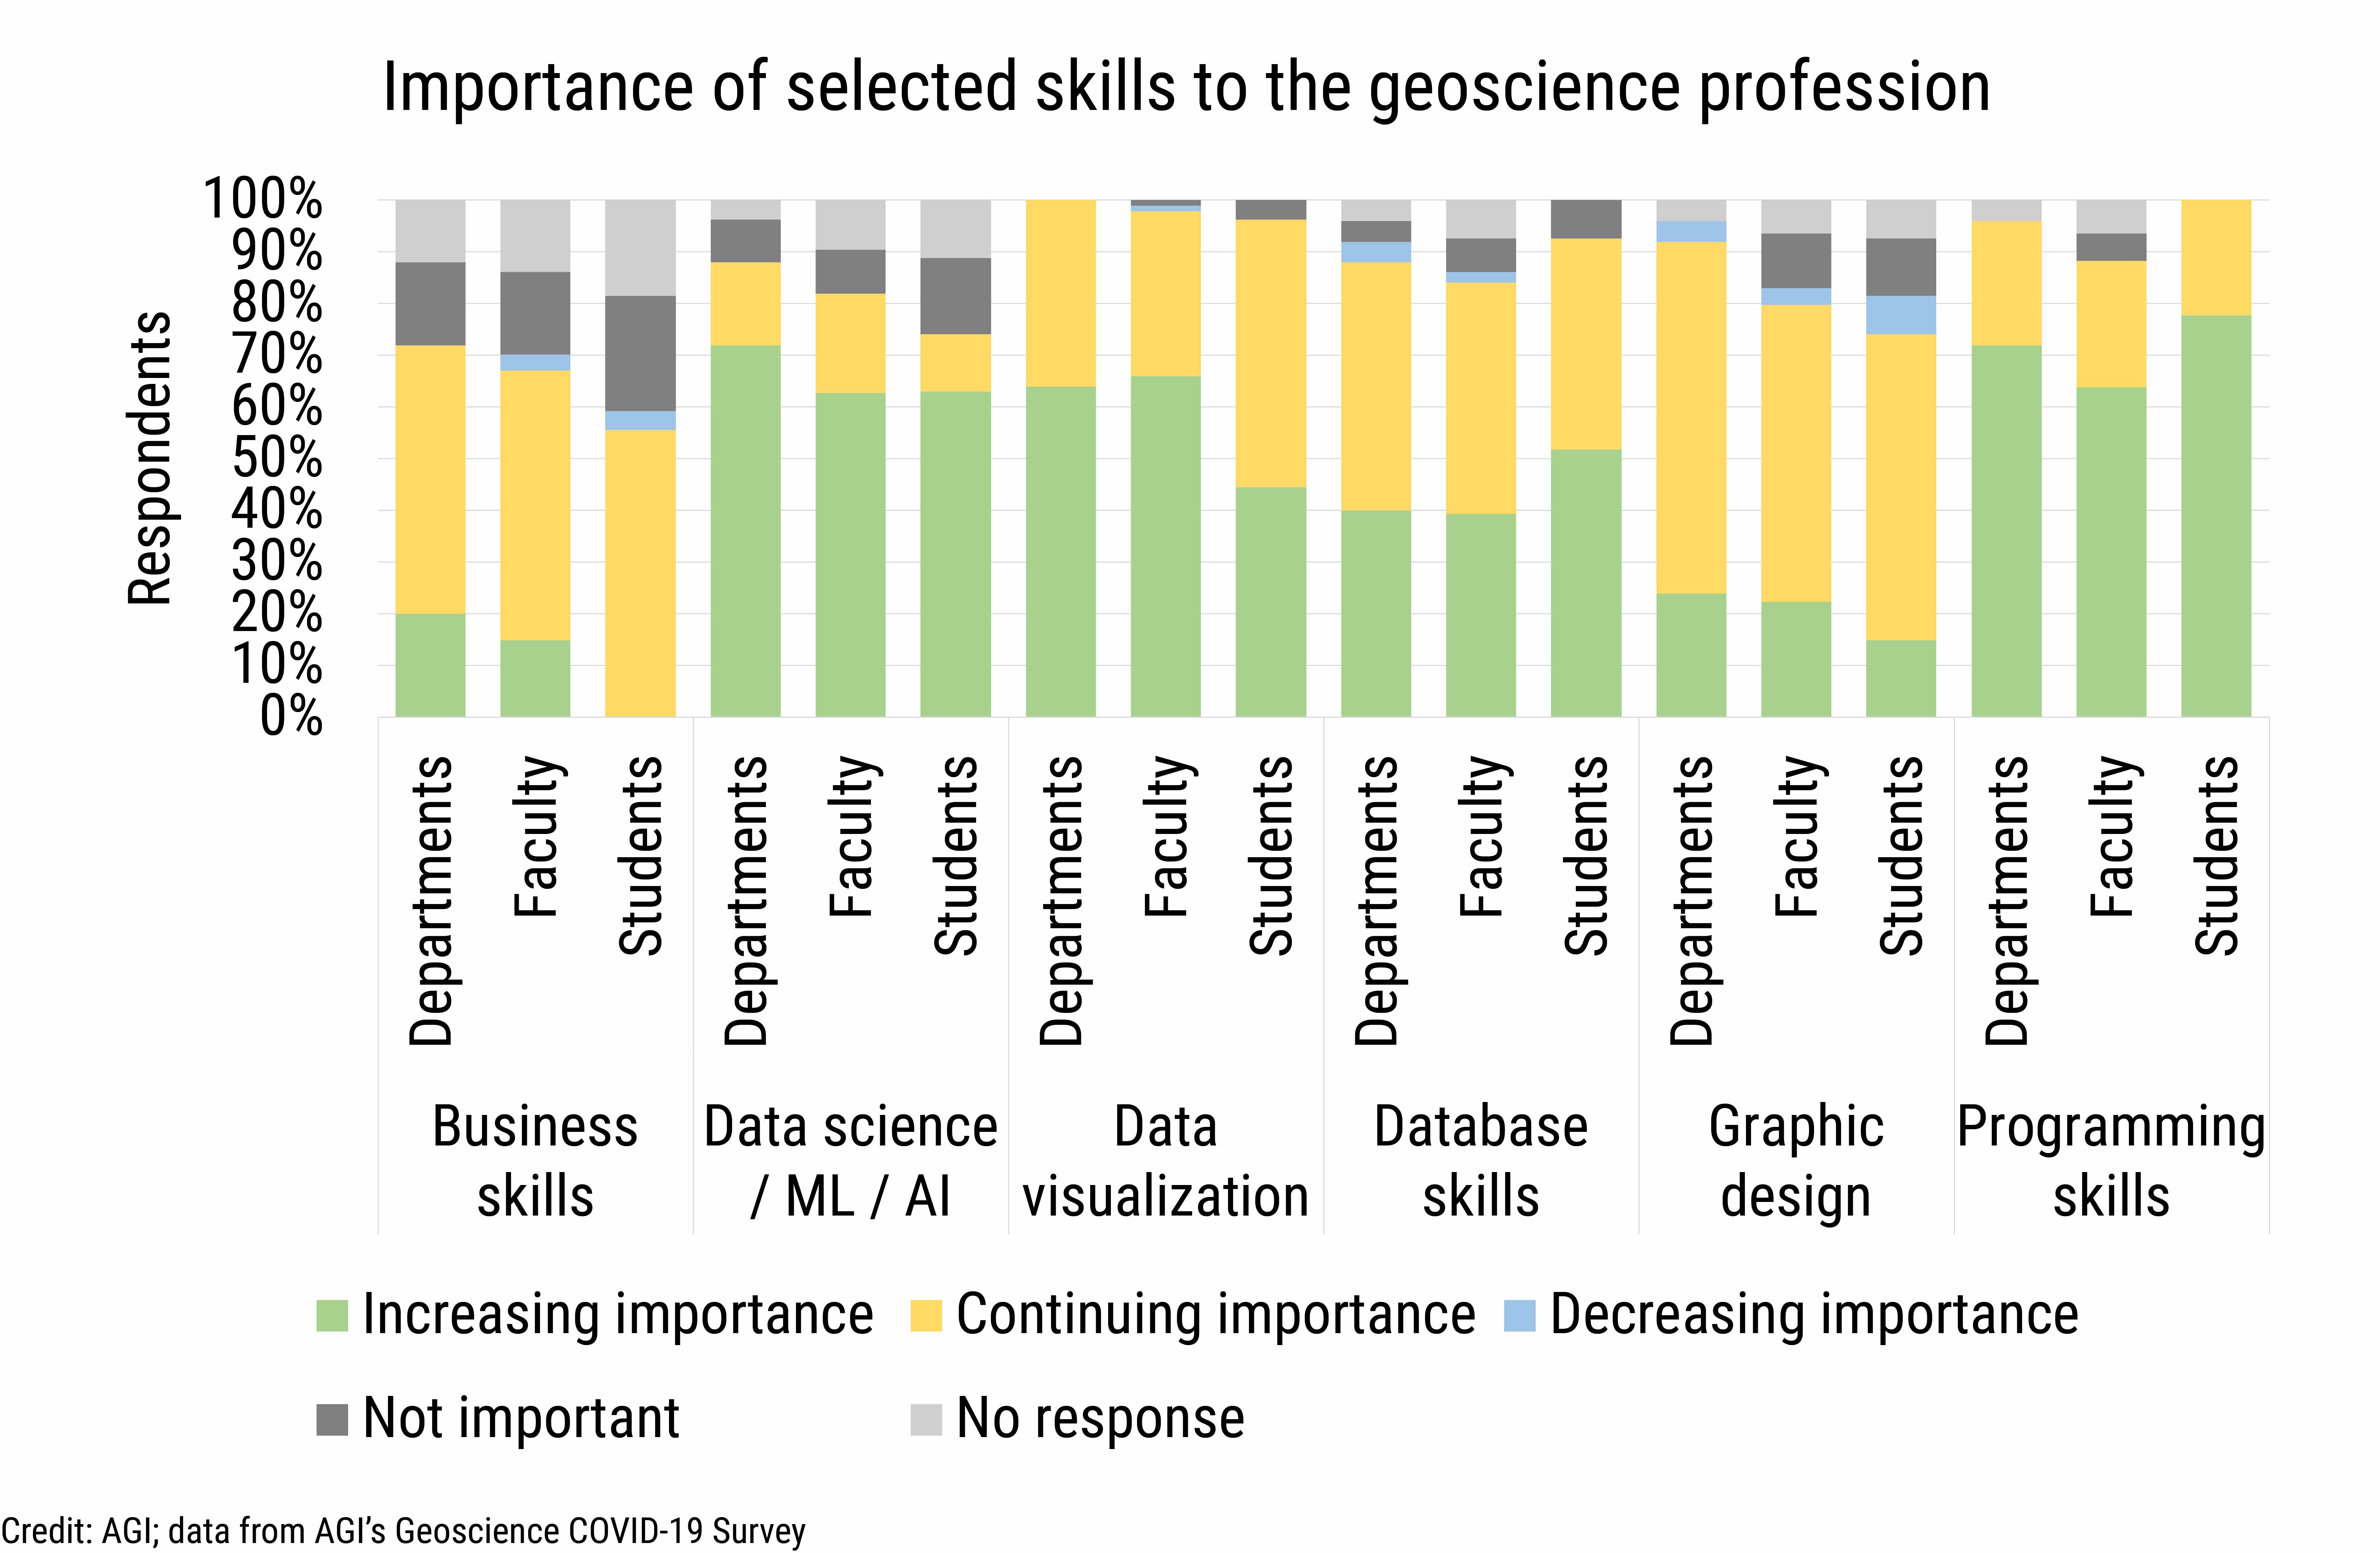 DB_2021-017 chart 01: Importance of selected skills to the geoscience profession (Credit: AGI; data from AGI&#039;s Geoscience COVID-19 Survey)